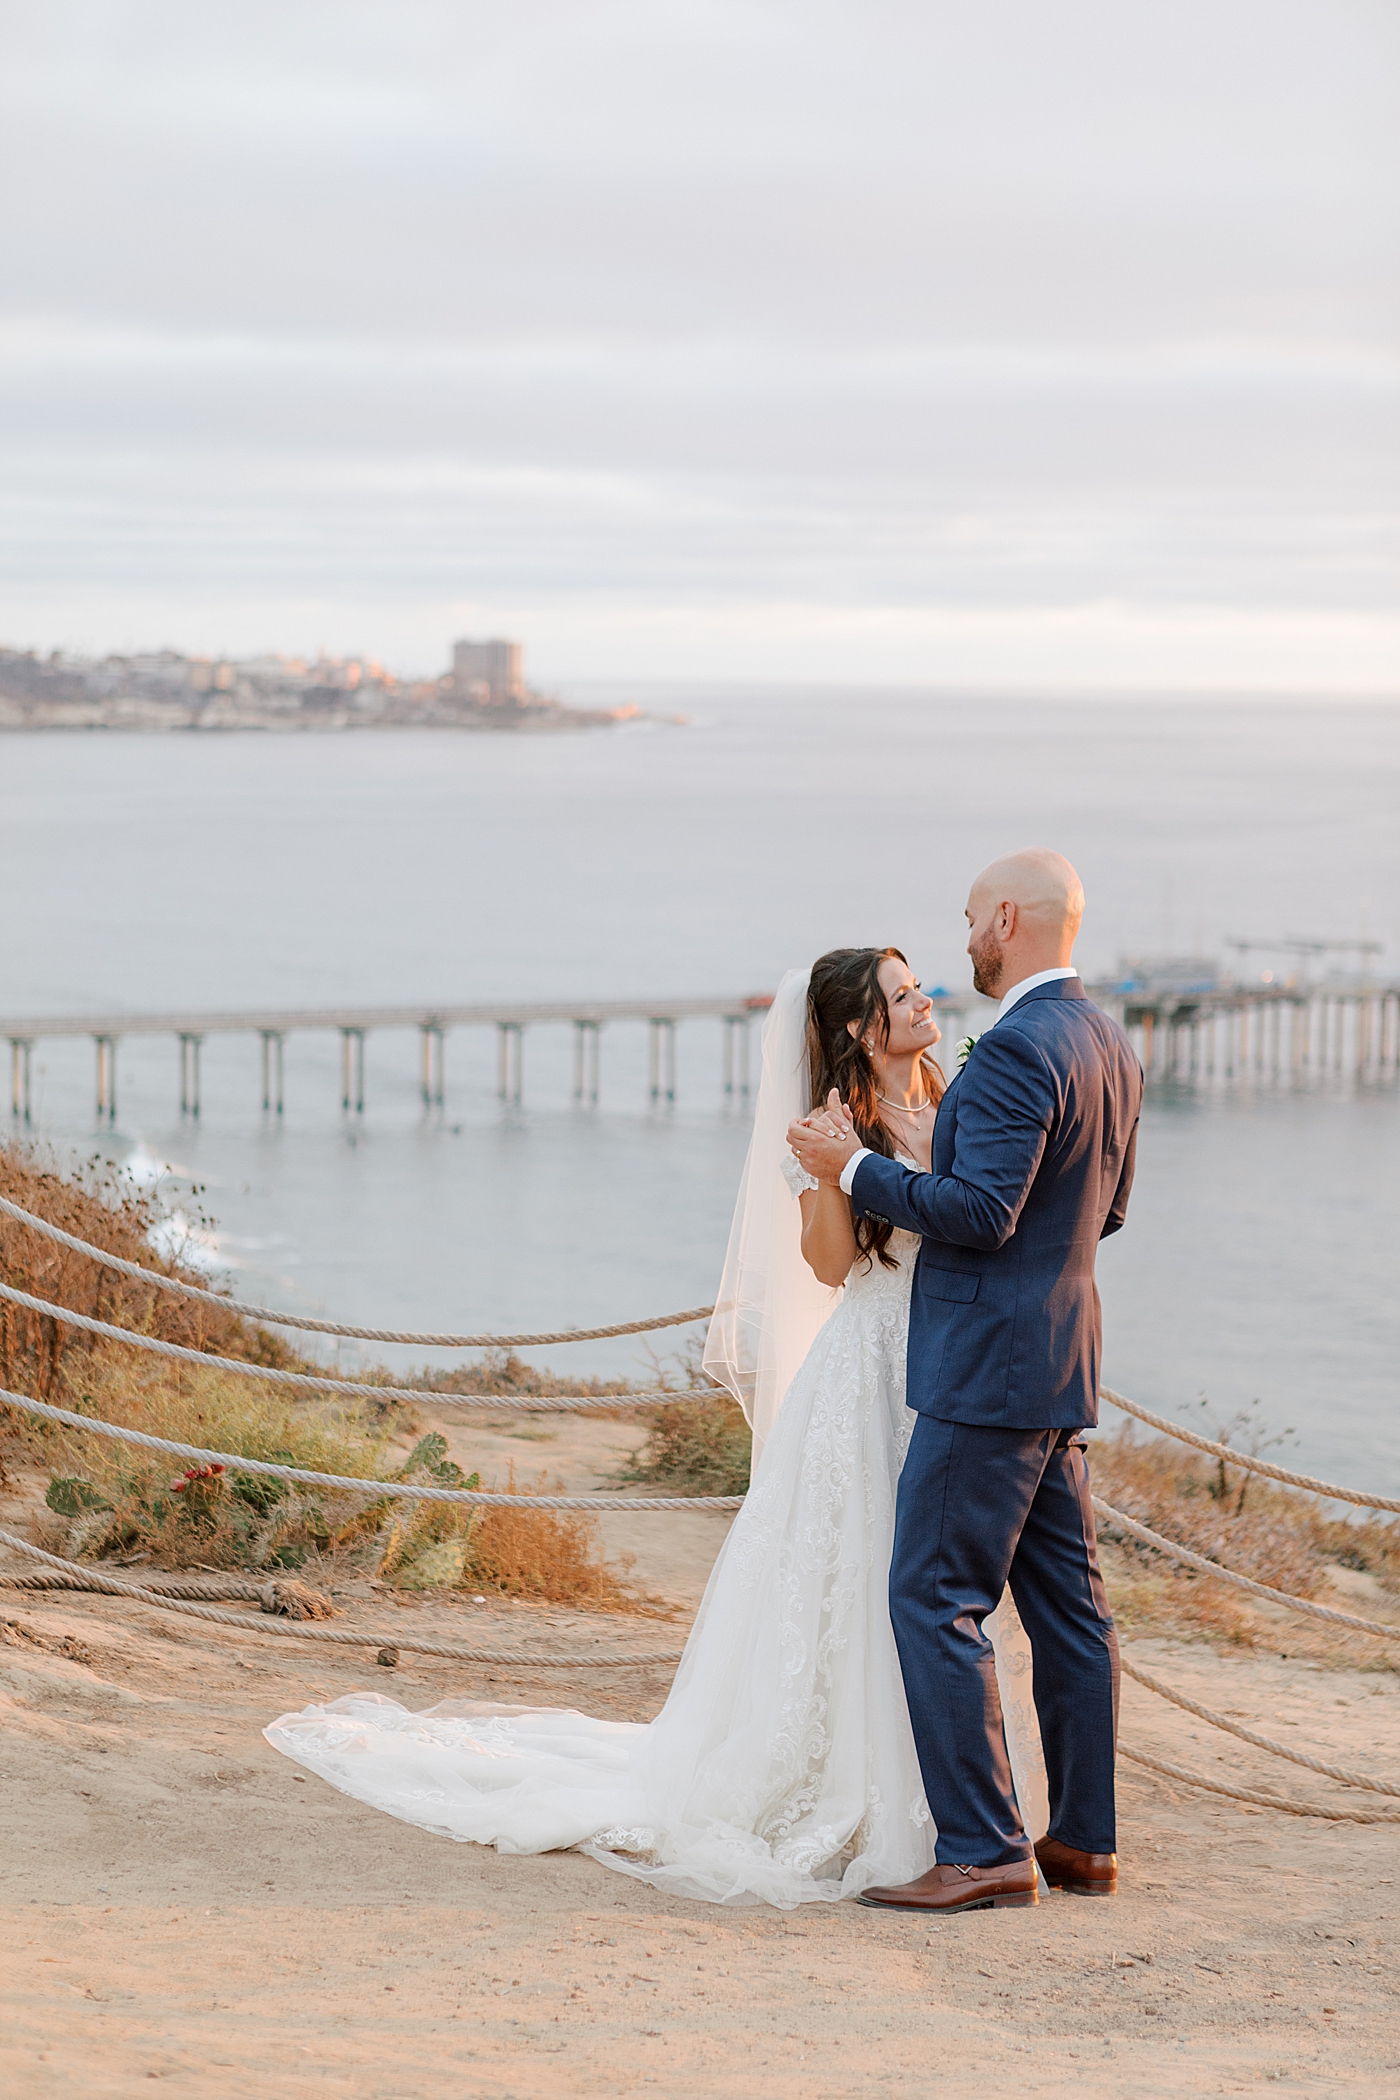 Groom in navy suit and bride in wedding dress holding each other and dancing on a seaside path at sunset | Image by Hope Helmuth Photography